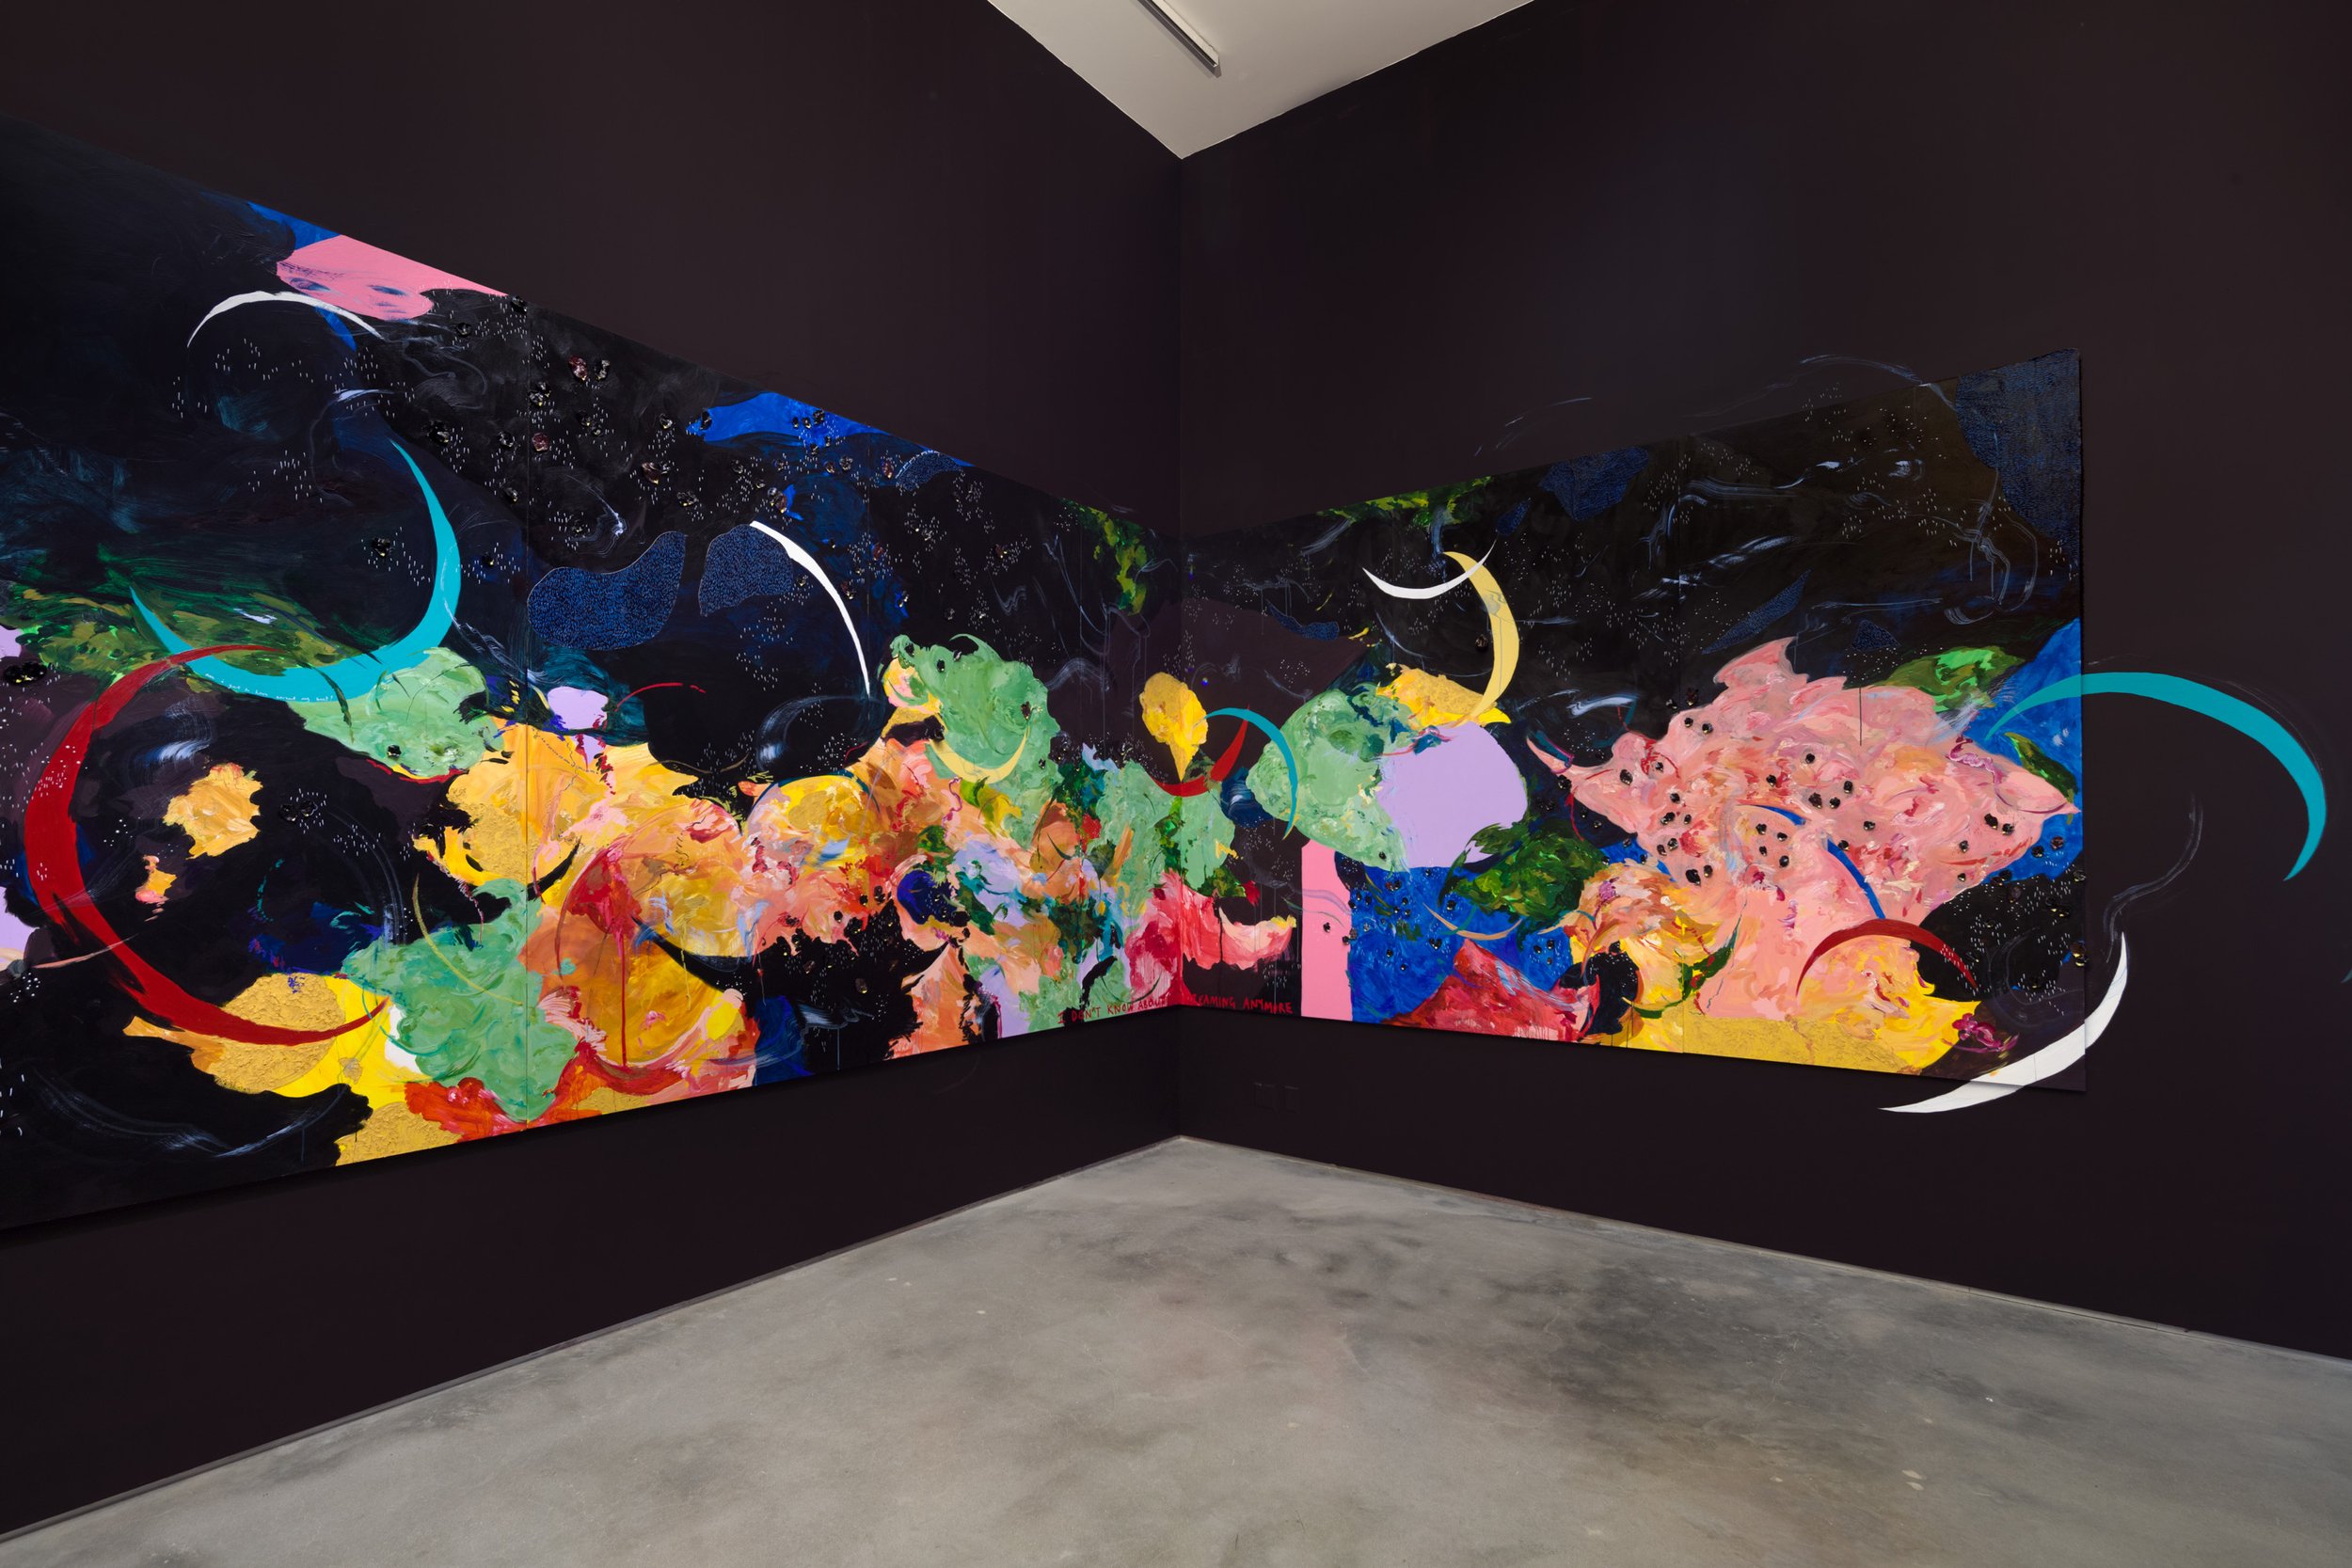 'At the Request of a Dreamer' Installation at Marianne Boesky Gallery